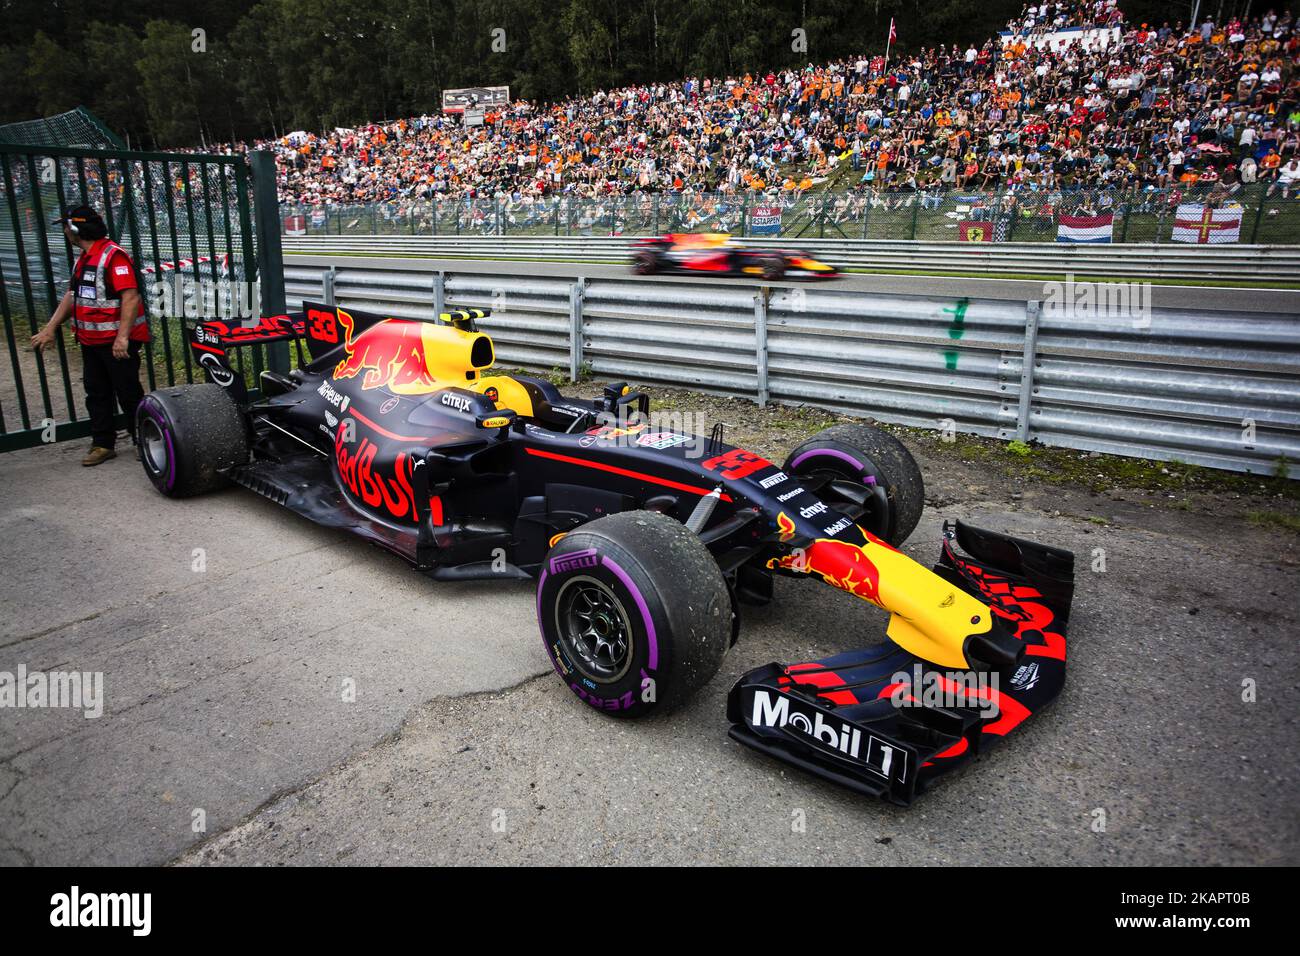 33 VERSTAPPEN Max from Nederlans of Red Bull Tag Heuer out while 03 RICCIARDO Daniel from Australia of Red Bull Tag Heuer passes trought the straight during the Formula One Belgian Grand Prix at Circuit de Spa-Francorchamps on August 27, 2017 in Spa, Belgium. (Photo by Xavier Bonilla/NurPhoto) Stock Photo